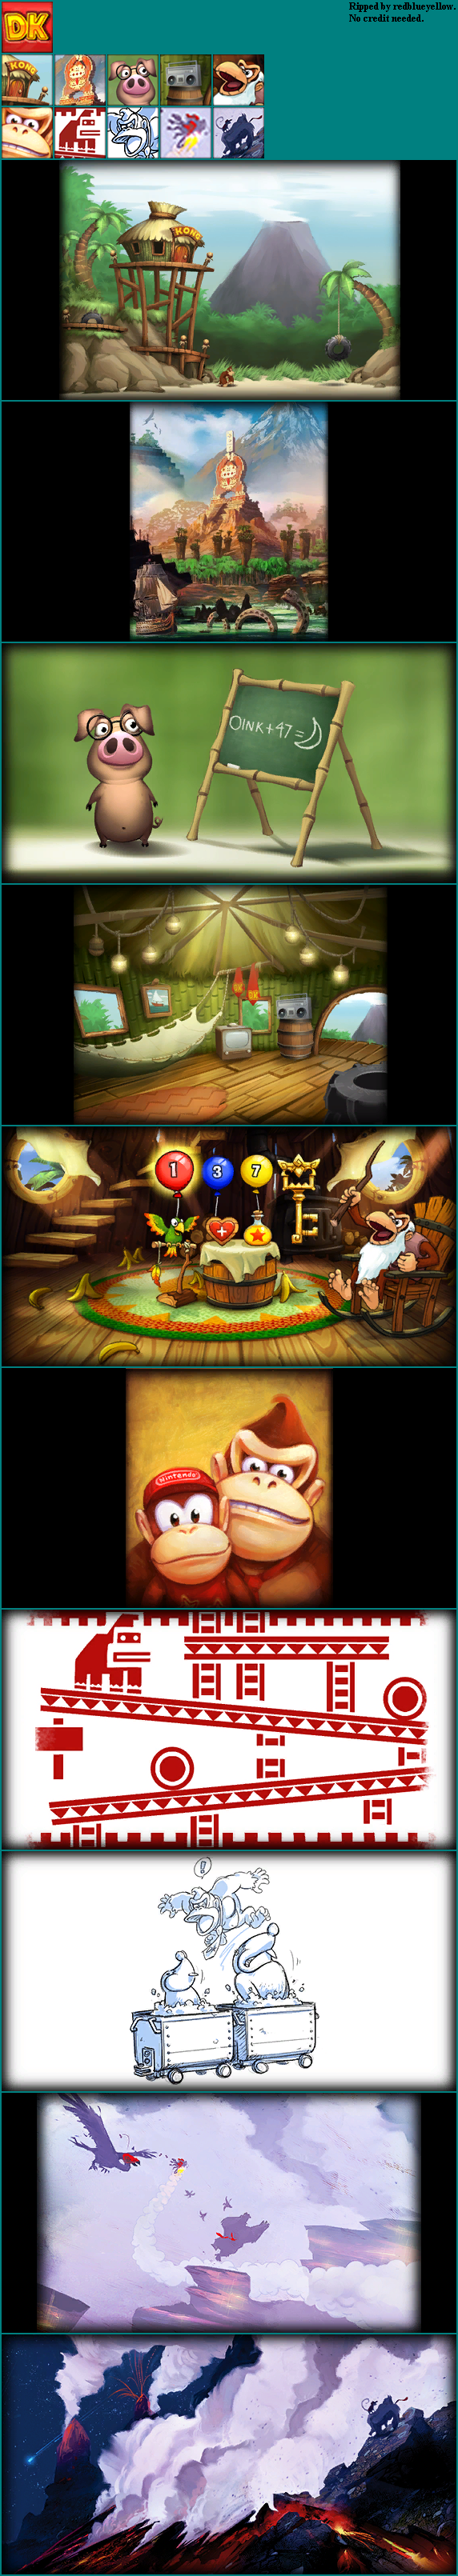 Donkey Kong Country Returns - Kong Gallery